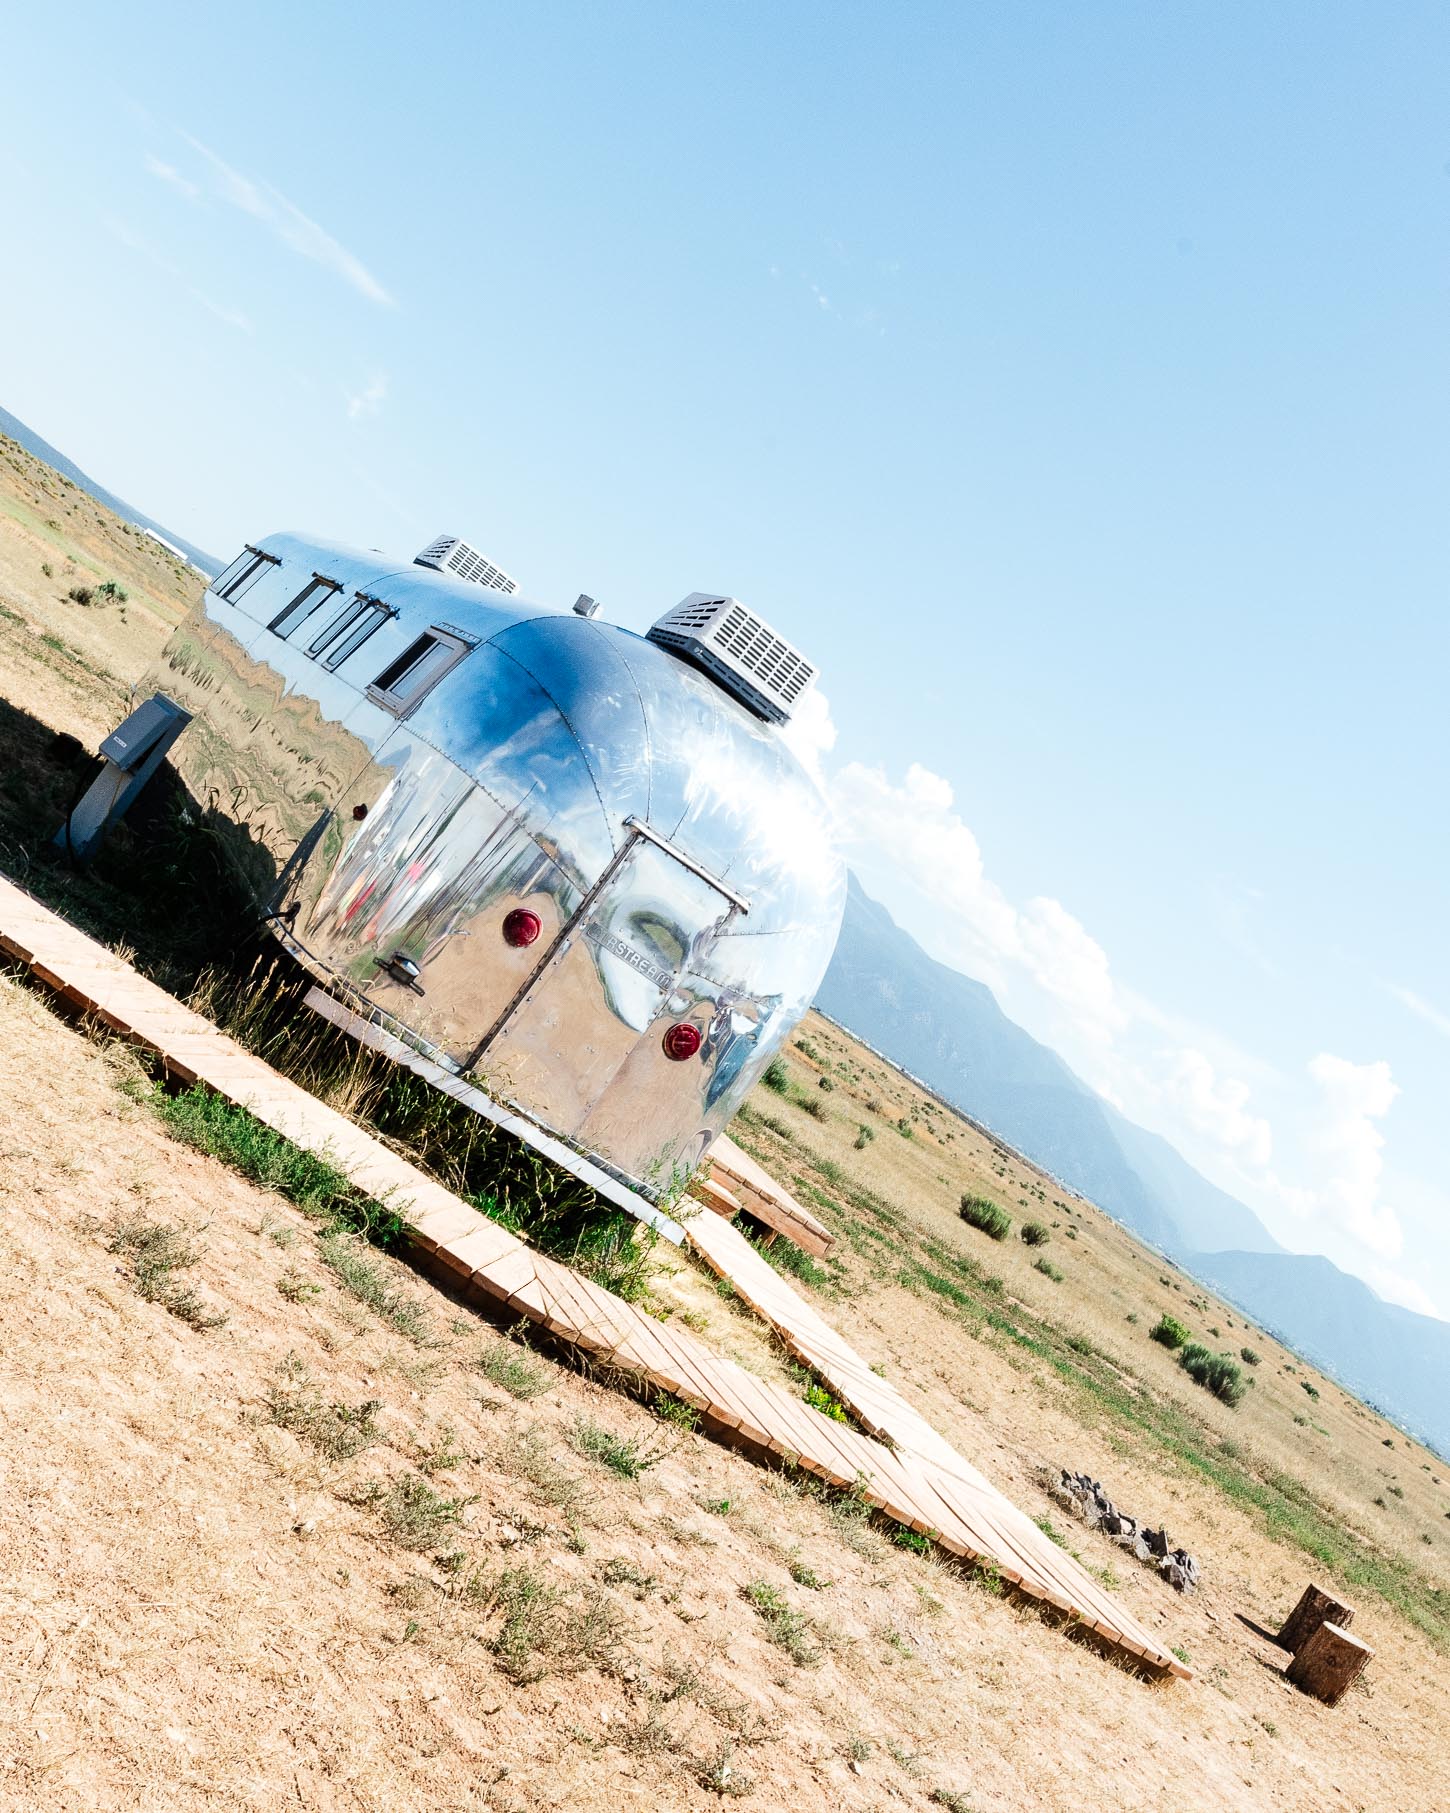 glamping vintage trailer camping in new mexico #travel #glamping #vintage #trailer